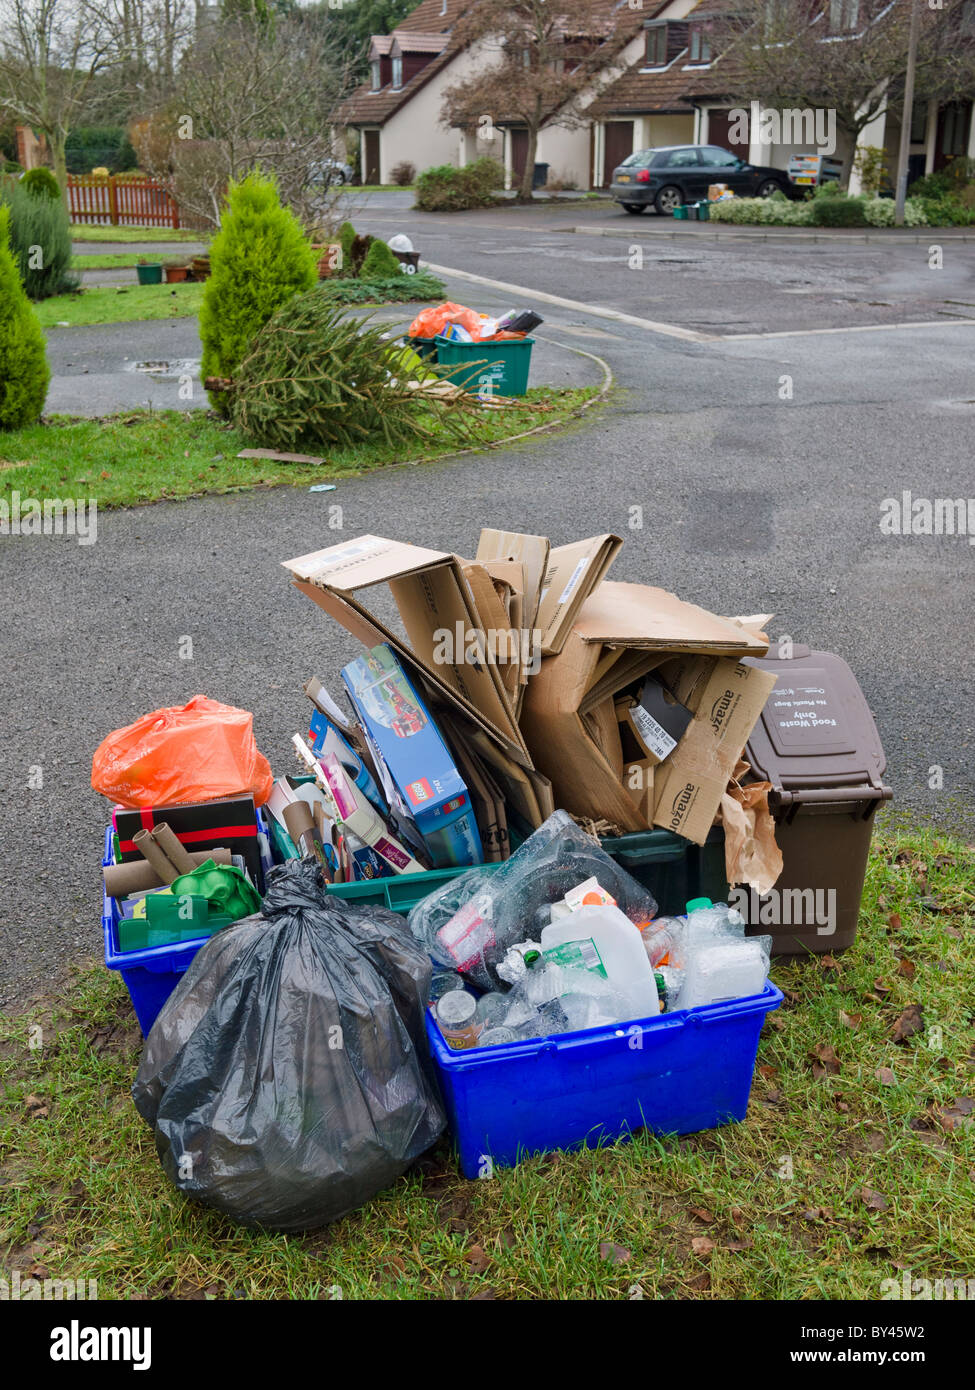 Overflowing kerbside recycling awaiting collection after delays due to poor weather. Stock Photo